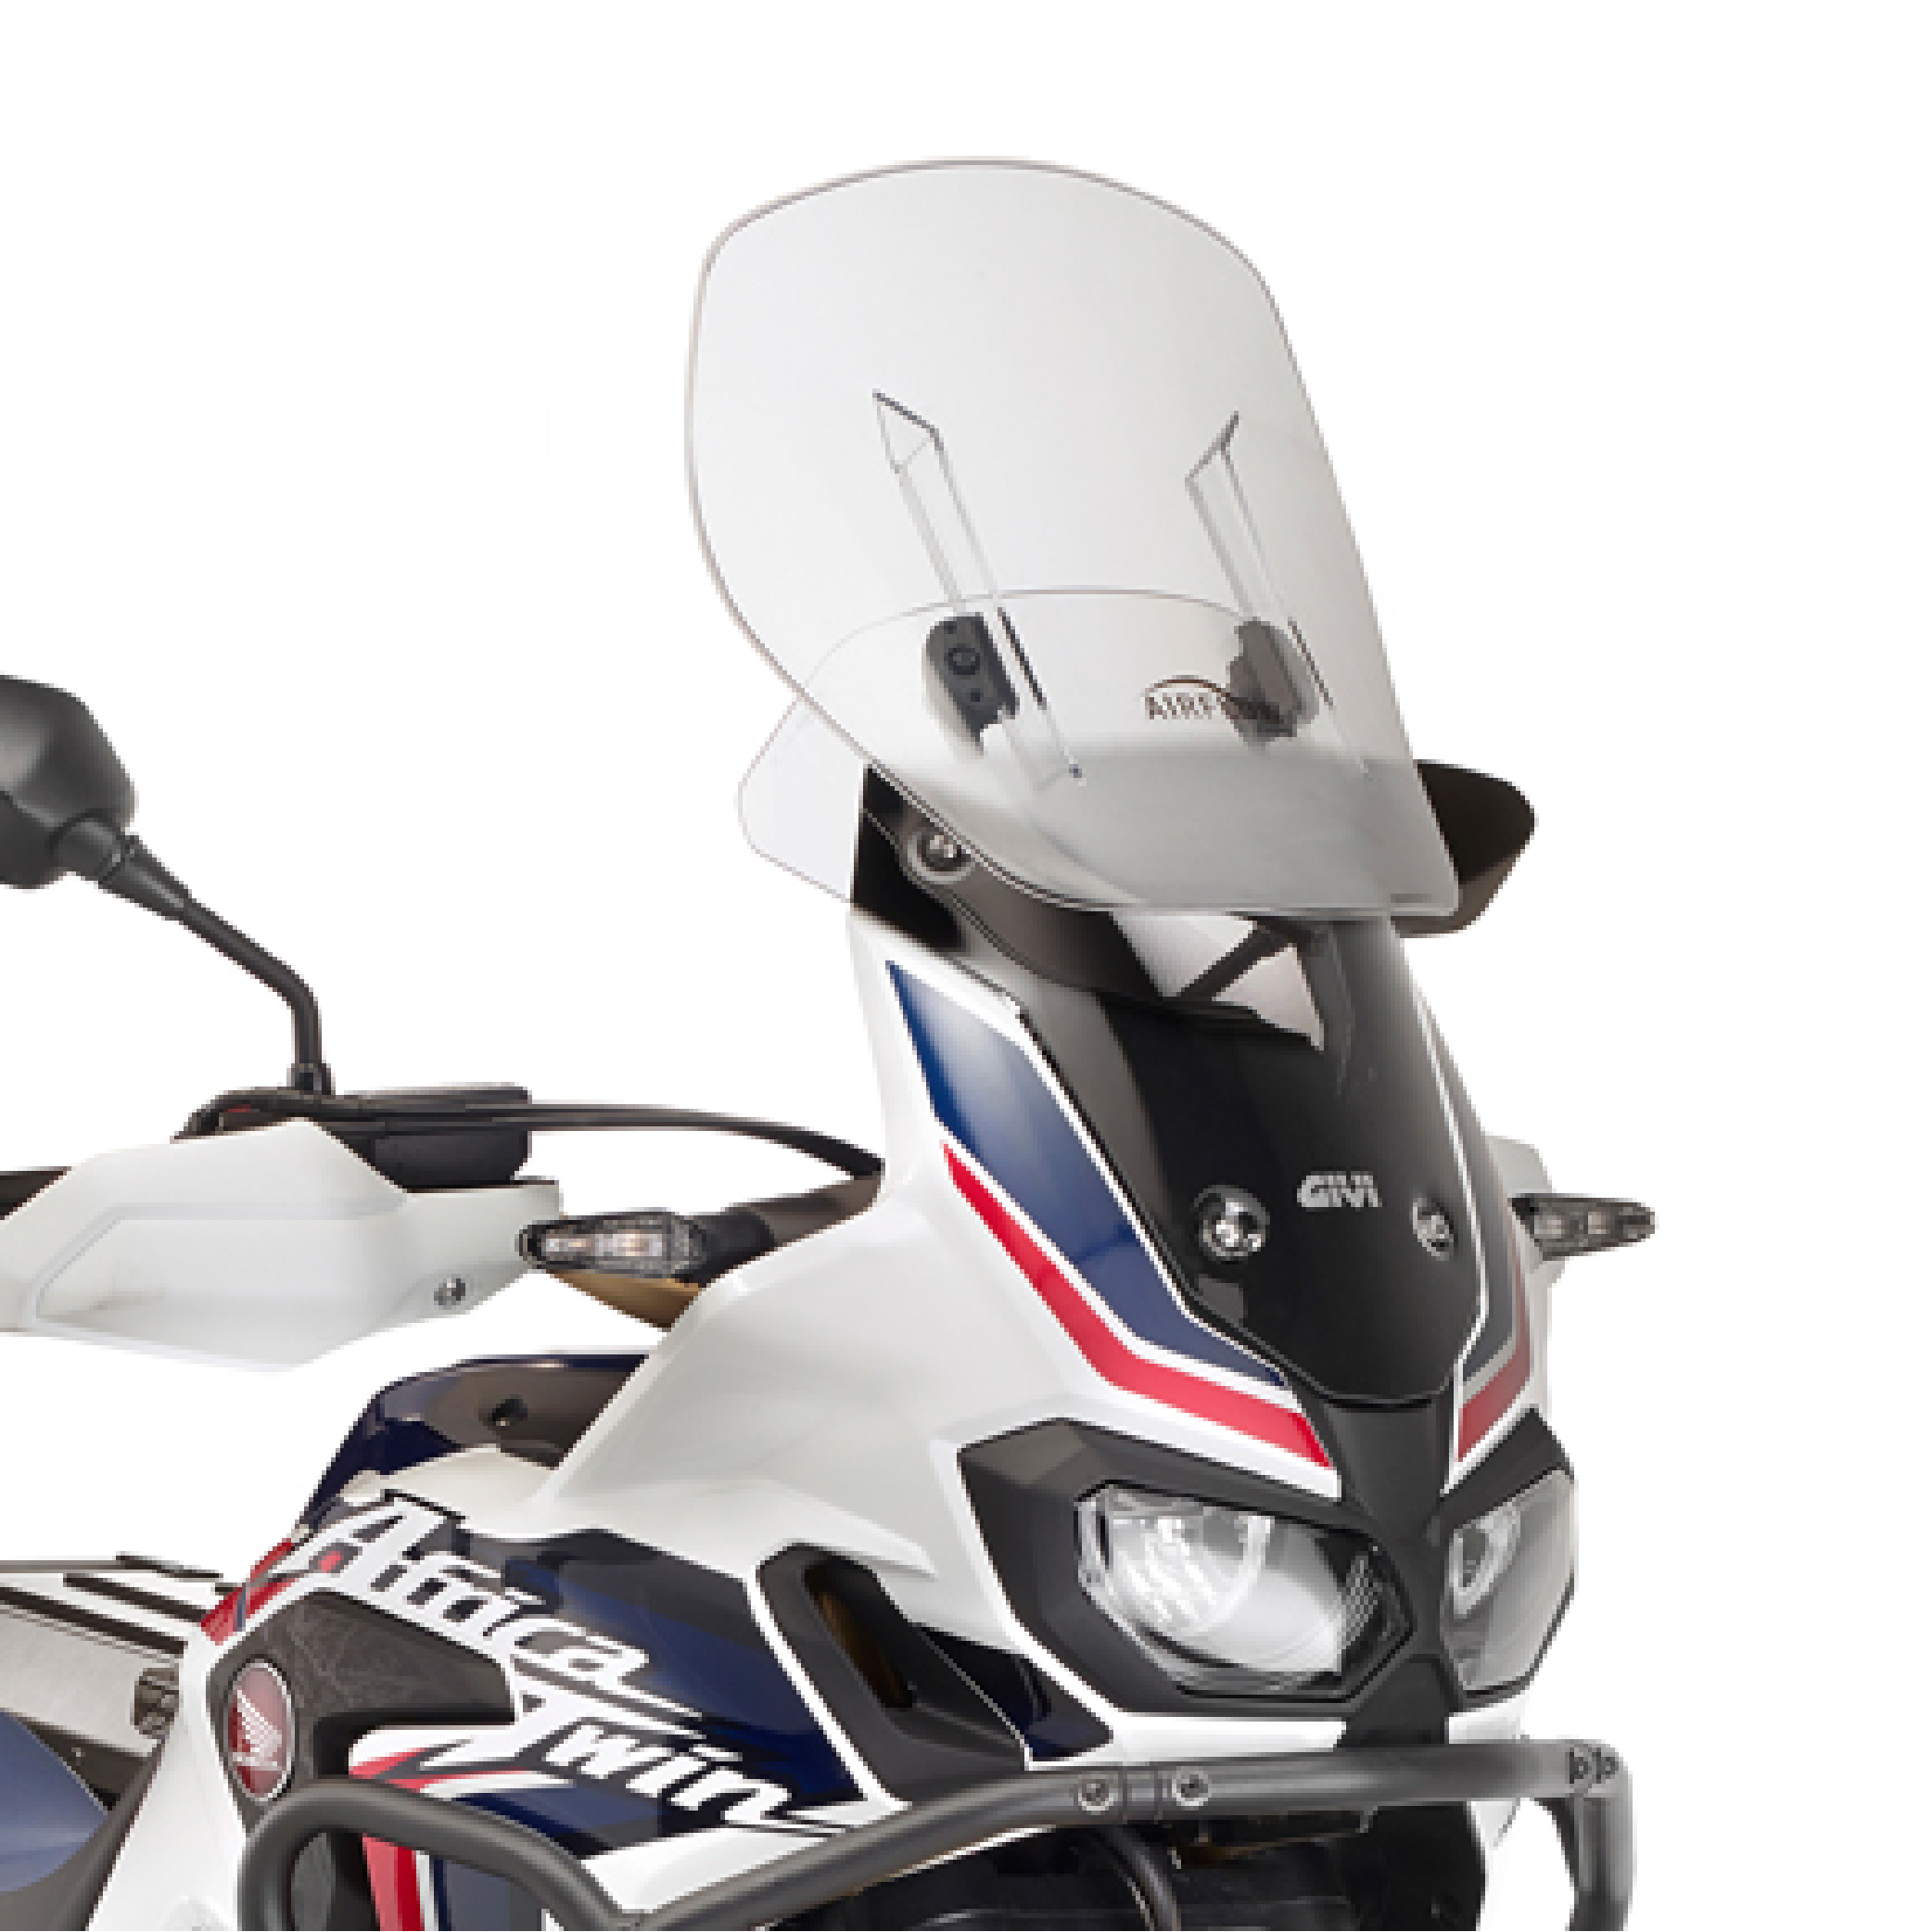 GIVI AF1144 Specific Screen for Honda Africa Twin Adventure Sports (2018>2019) – อุปกรณ์กันลม